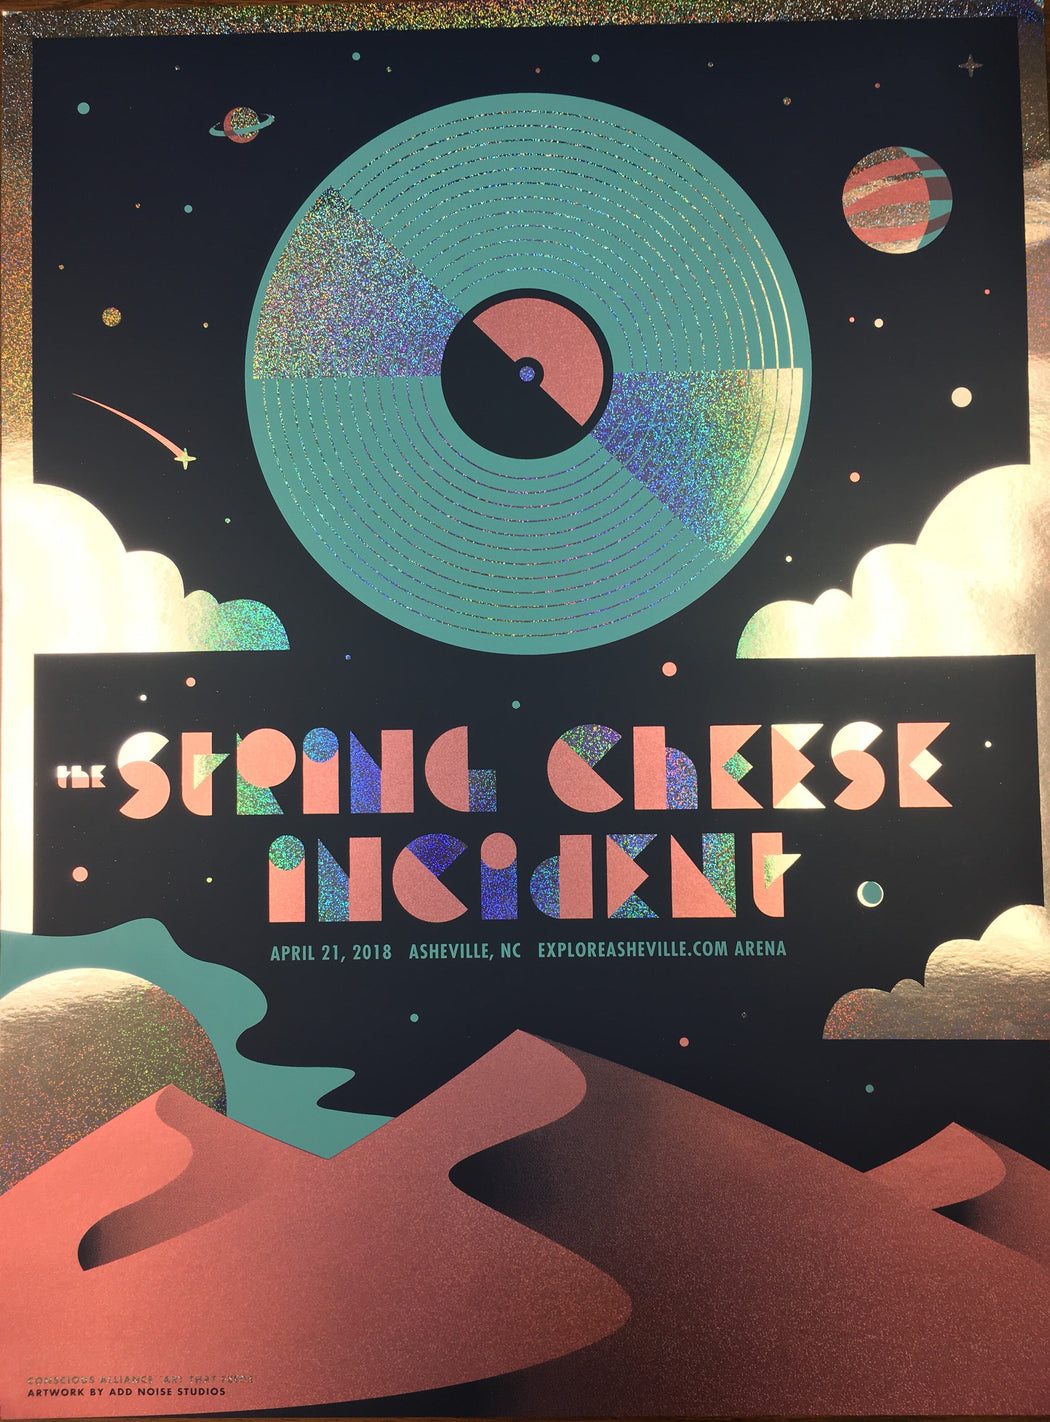 String Cheese Incident Asheville - 2018